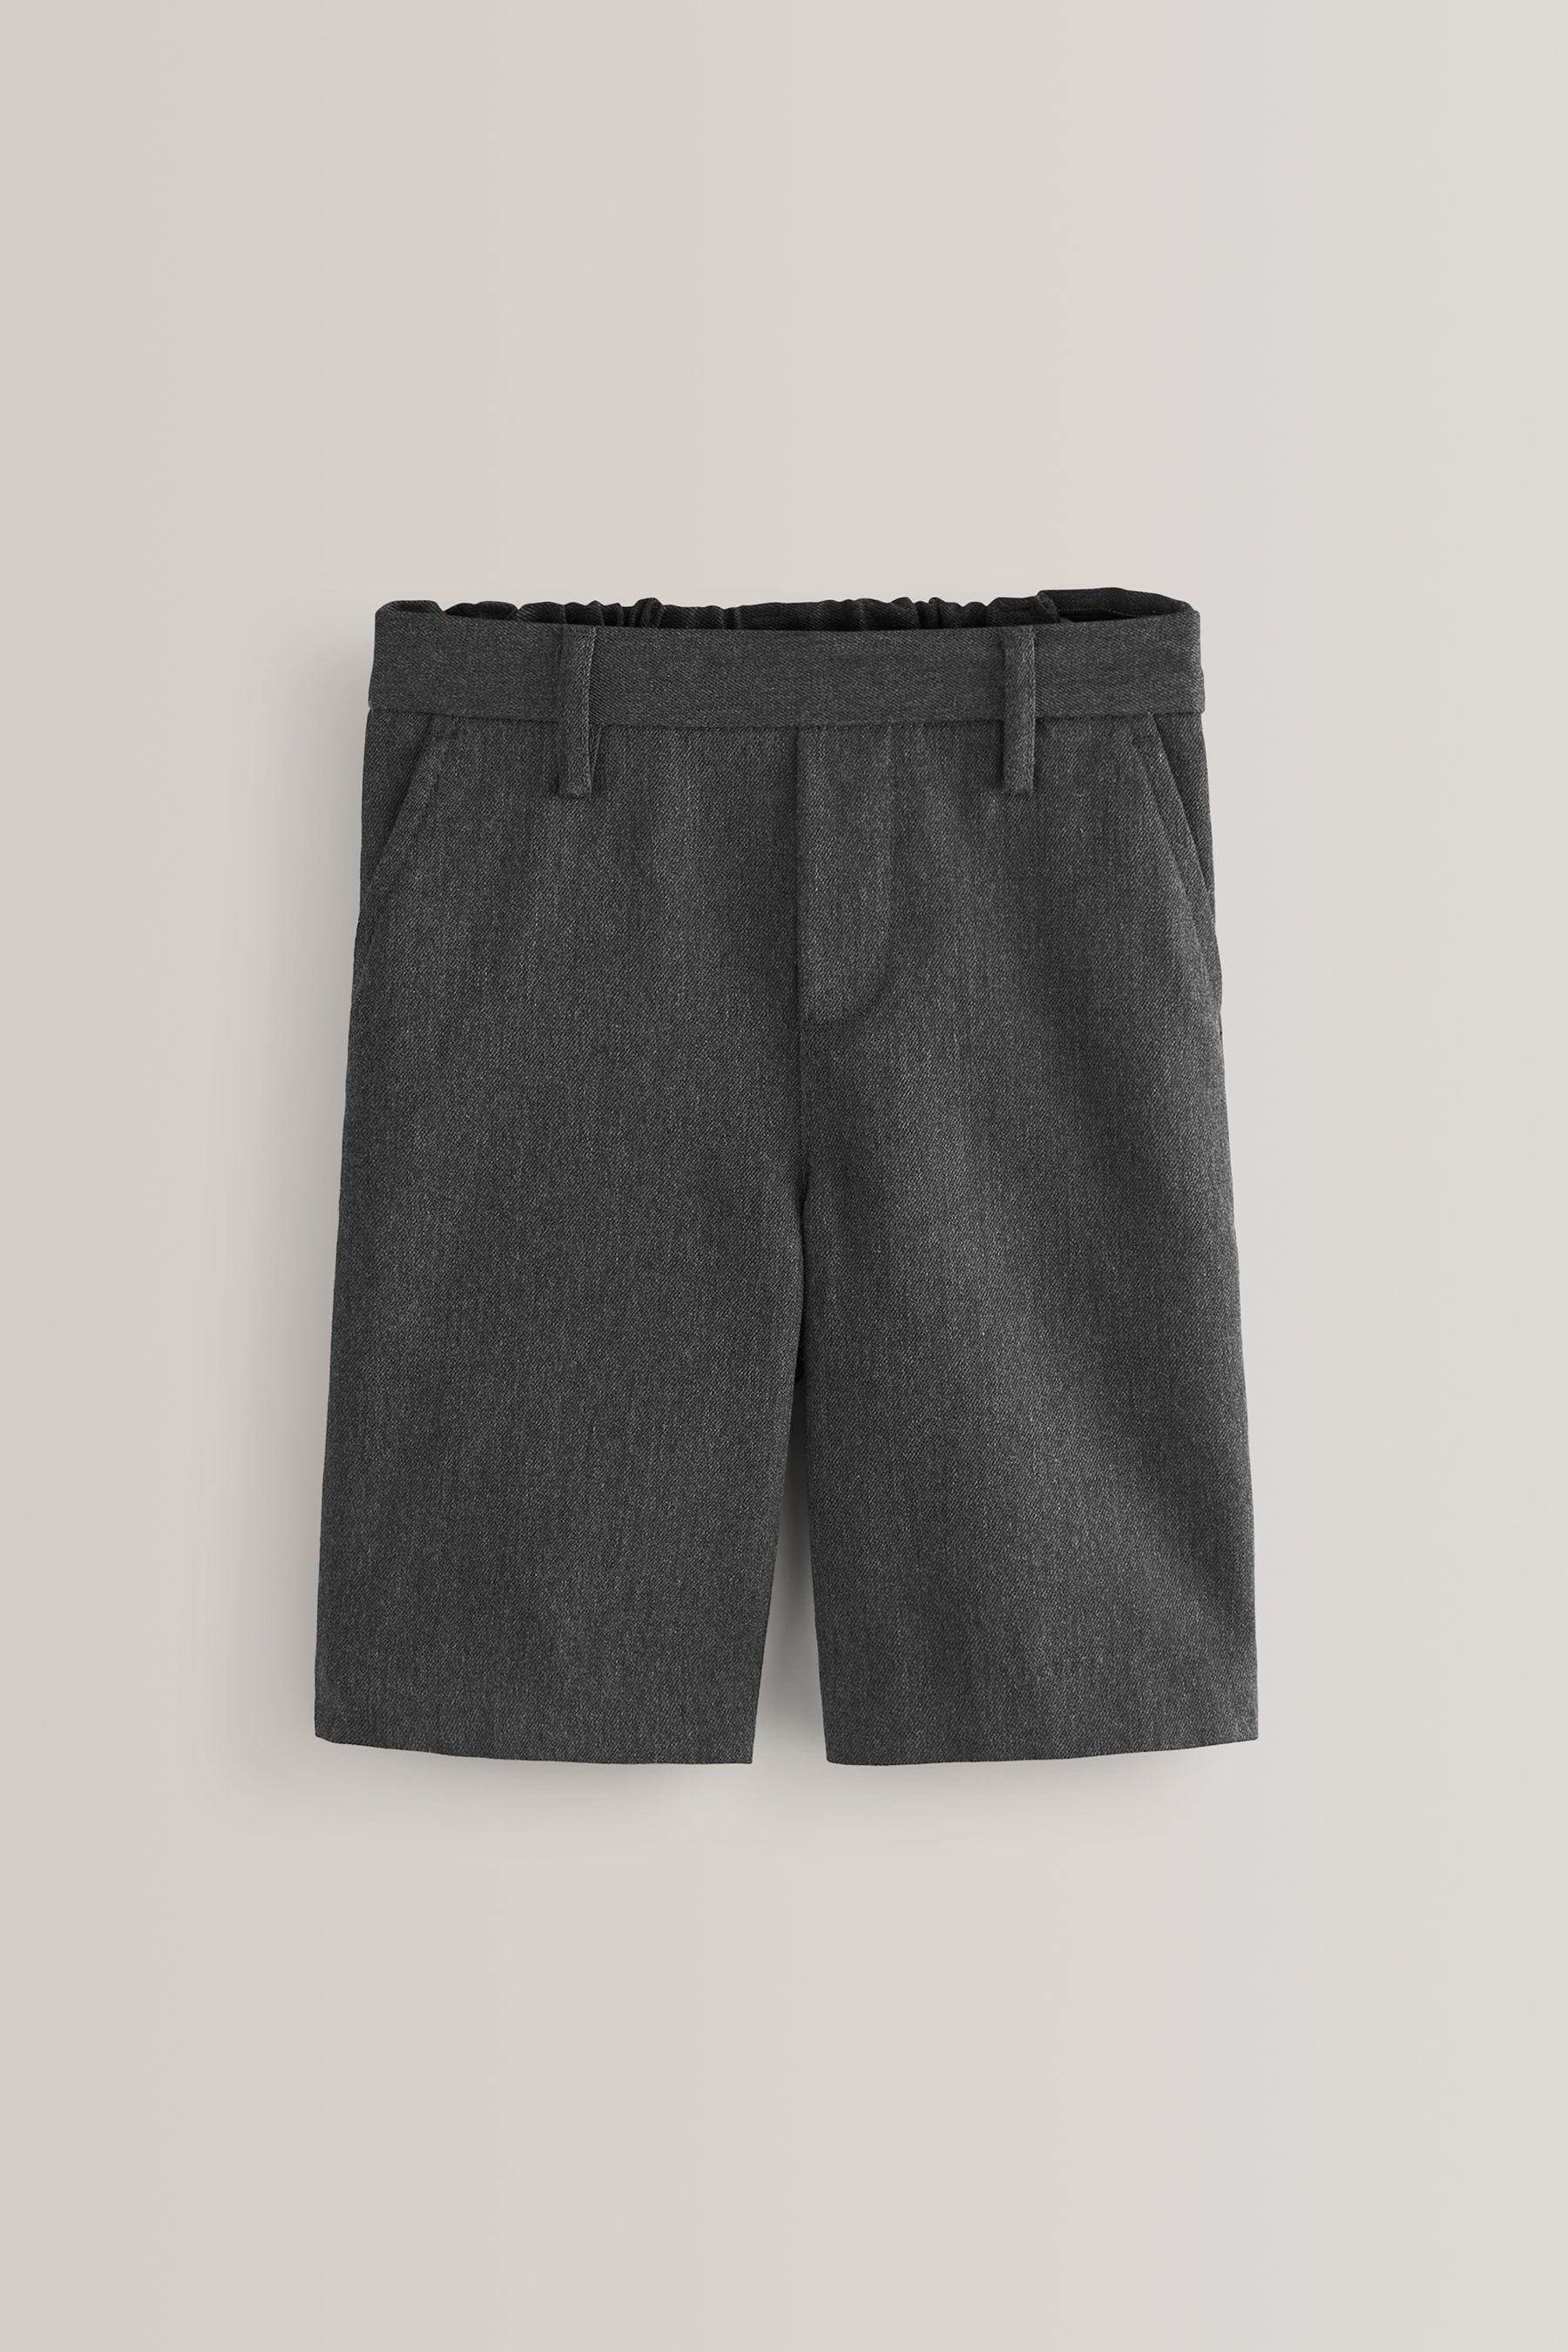 Buy Grey Regular Pull-On Waist Flat Front Shorts (3-14yrs) from the ...